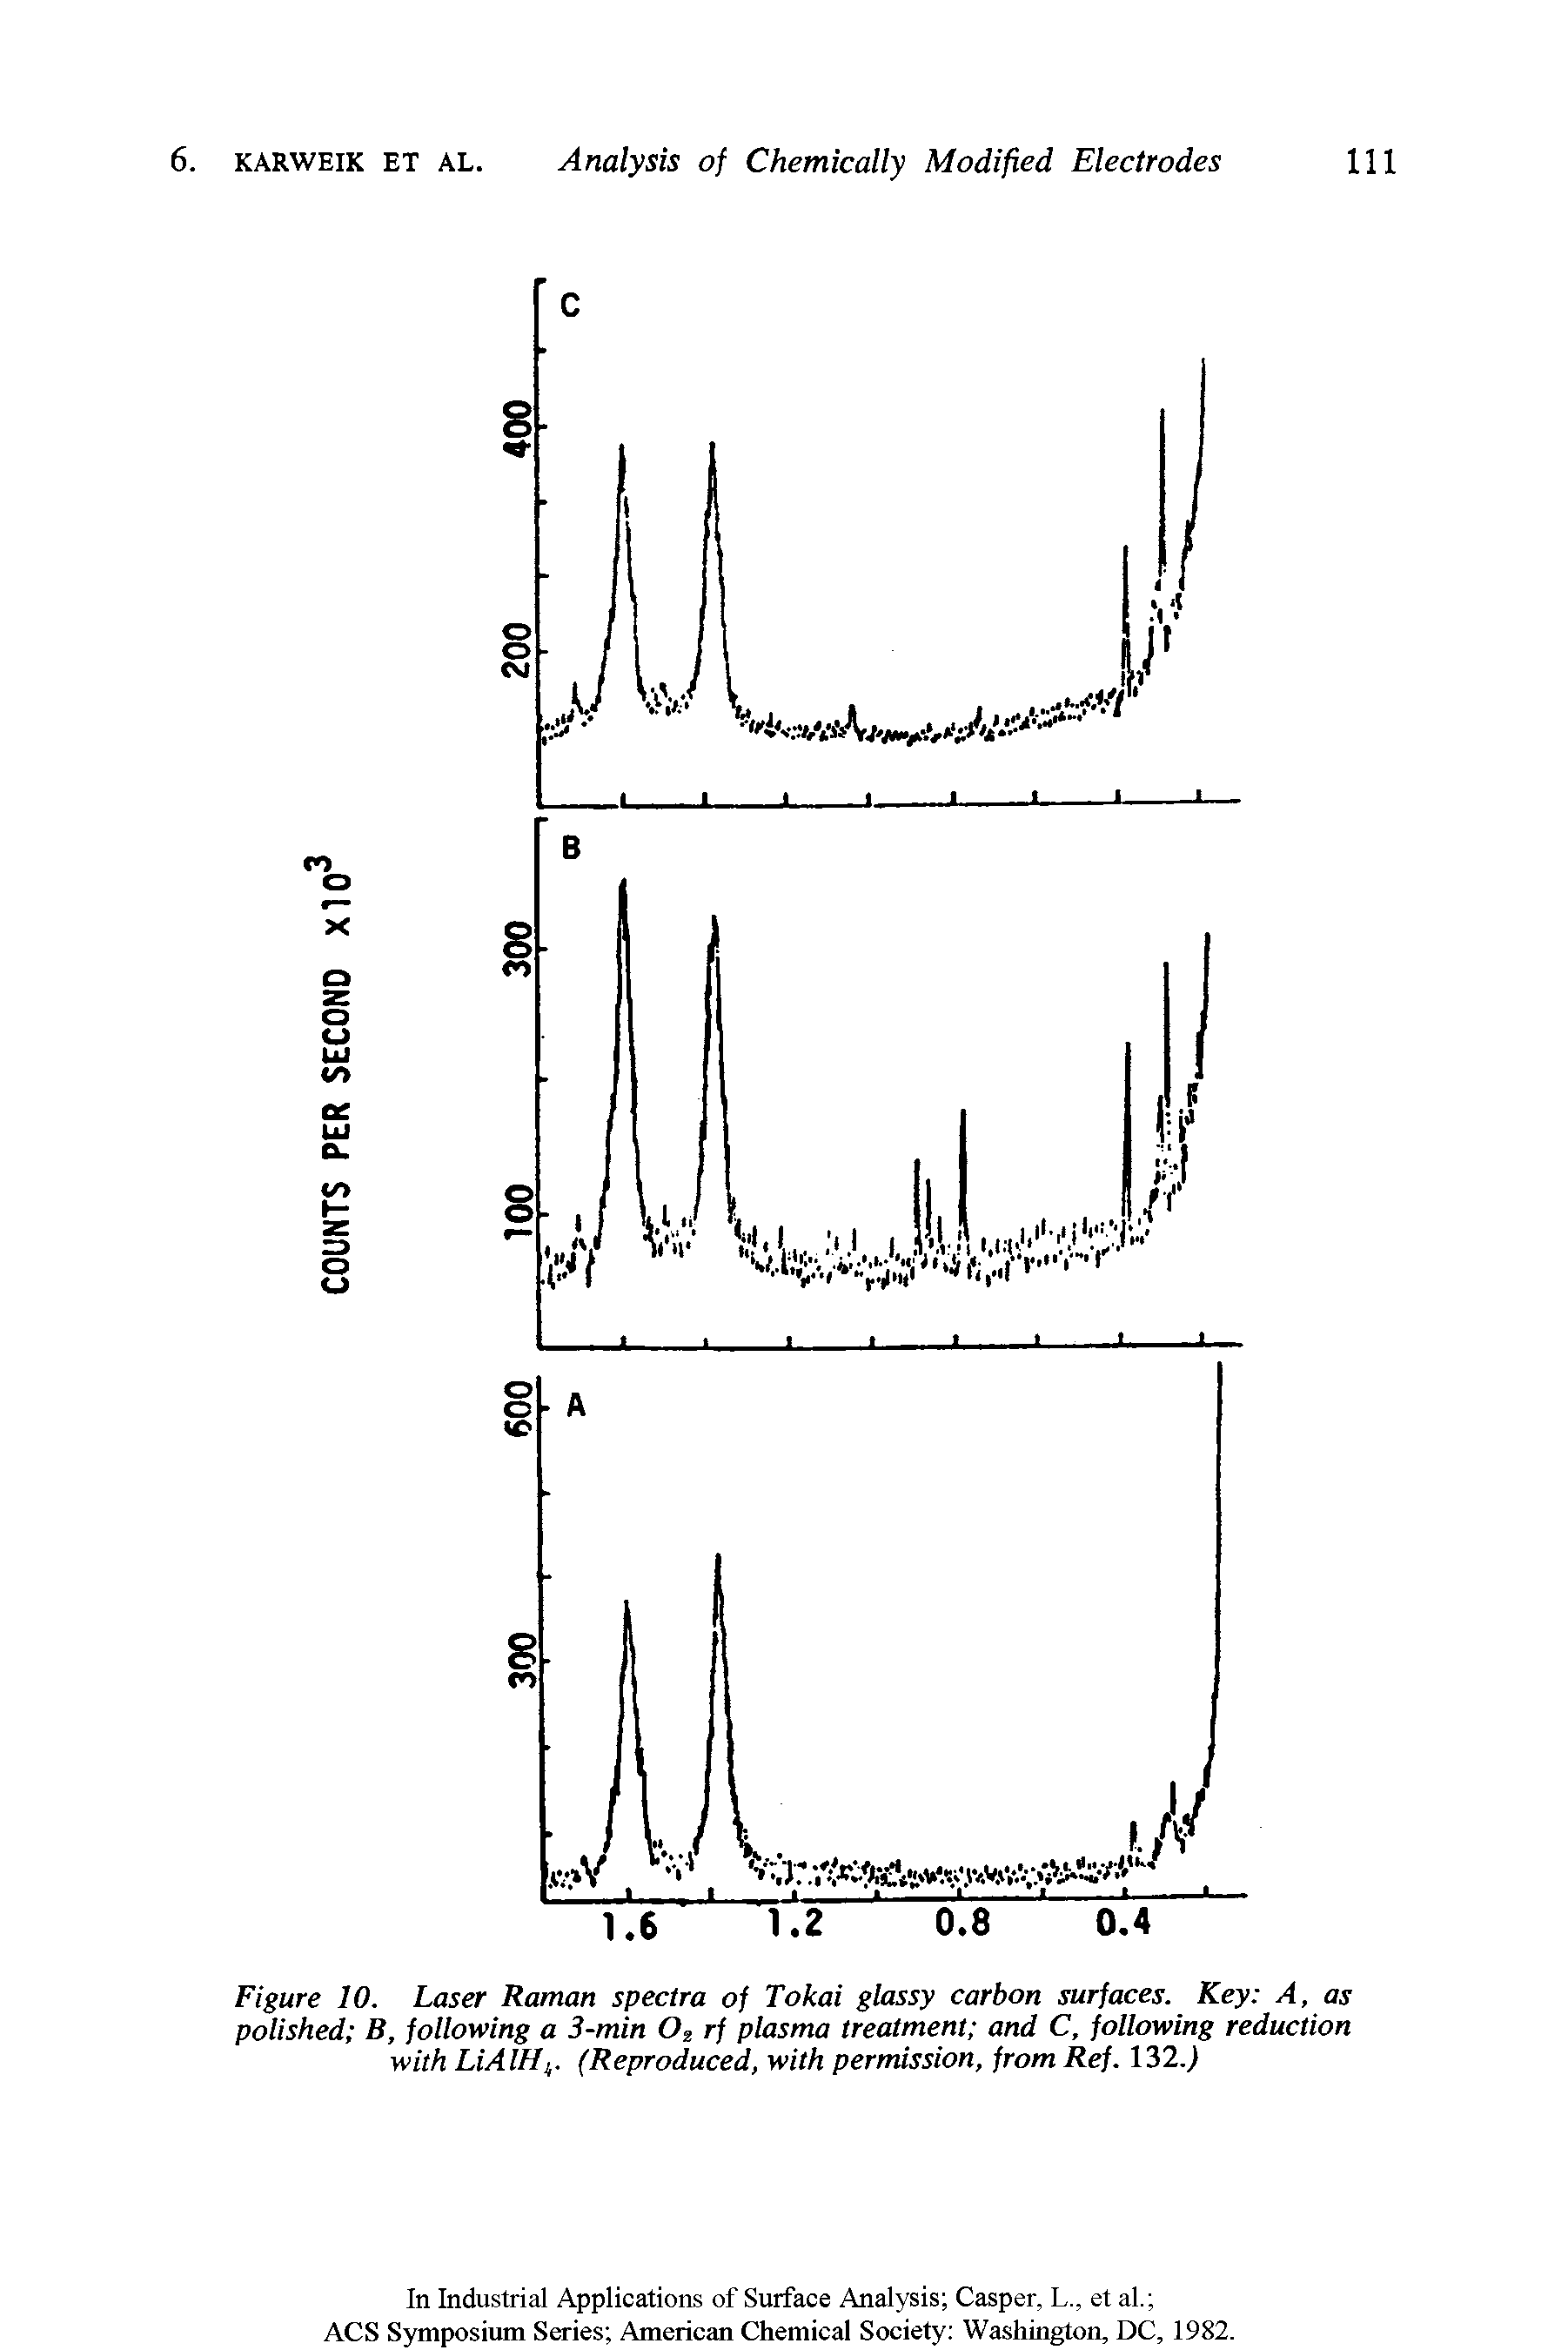 Figure 10. Laser Raman spectra of Tokai glassy carbon surfaces. Key A, as polished B, following a 3-min 02 rf plasma treatment and C, following reduction with LiAlHk. (Reproduced, with permission, from Ref. 132.)...